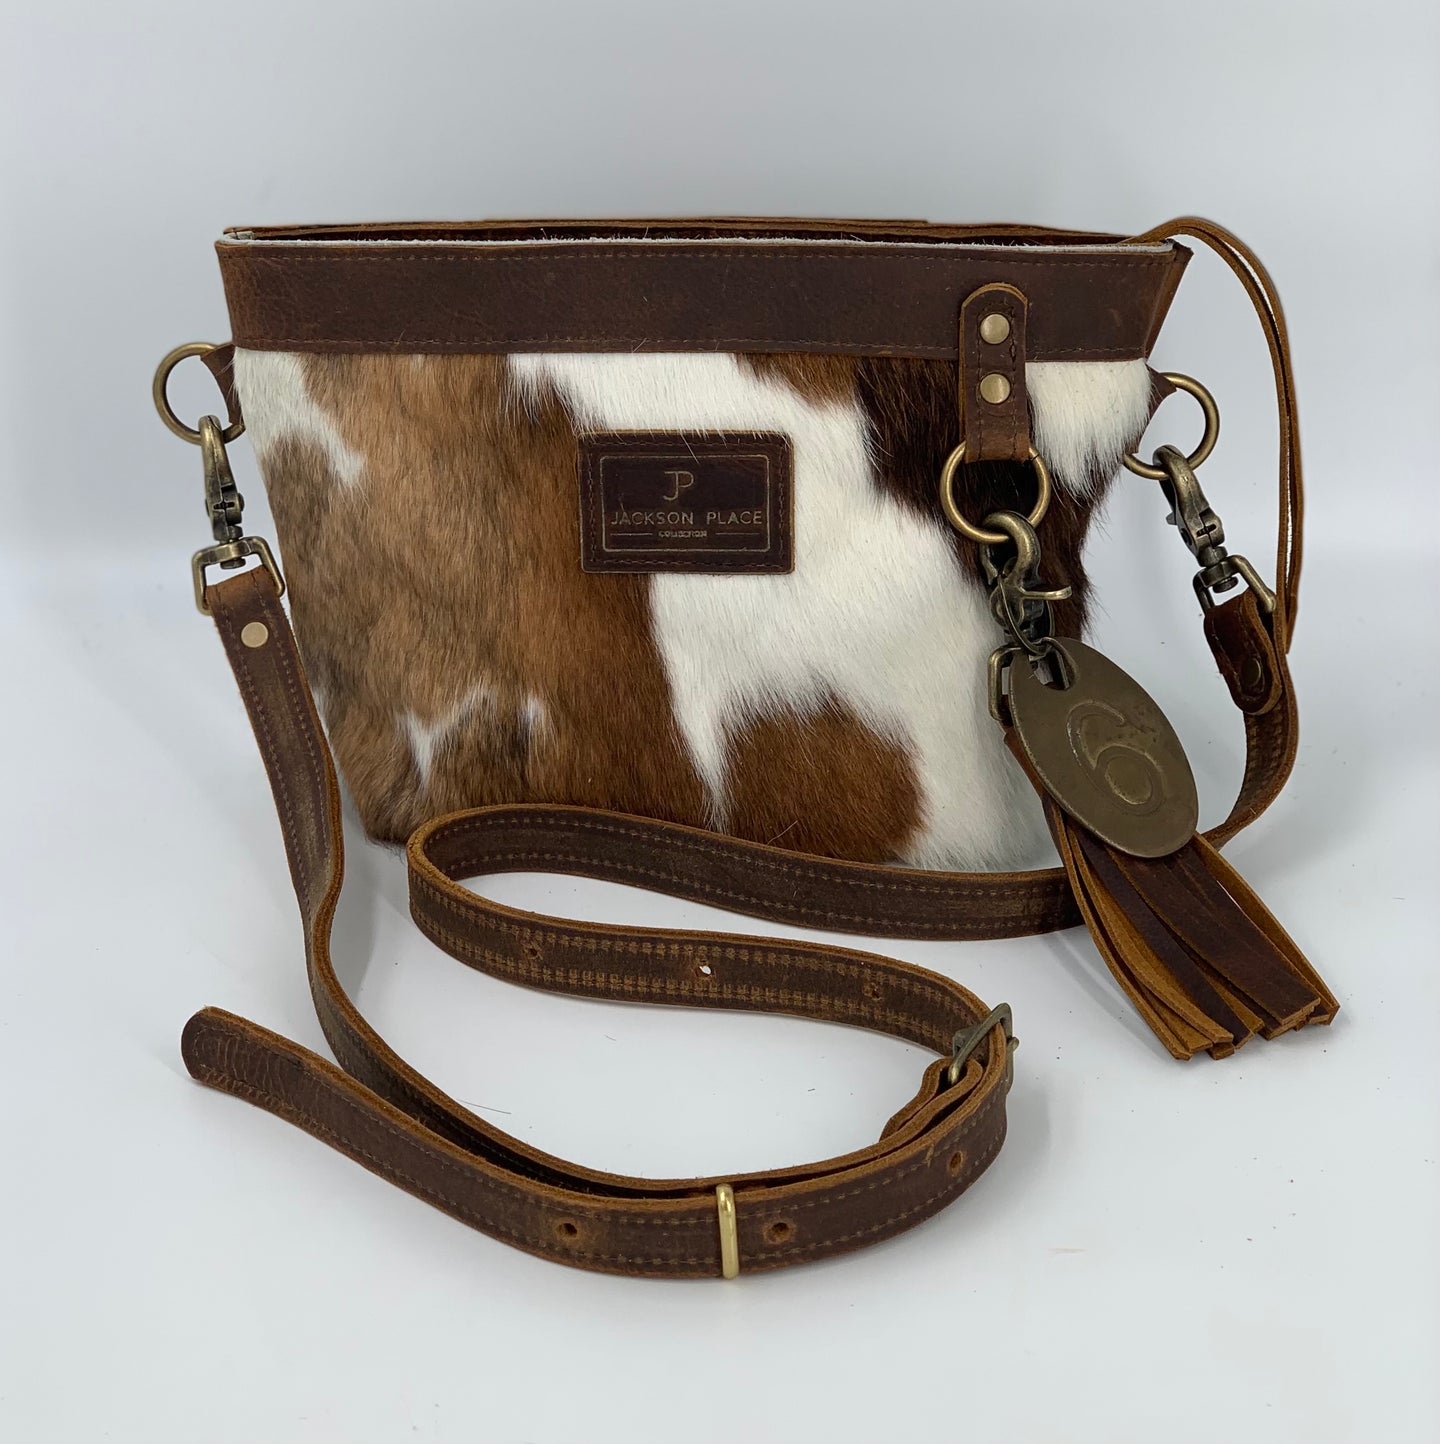 Small Brown & White Hair-on-Hide Cowhide Leather Tote Crossbody